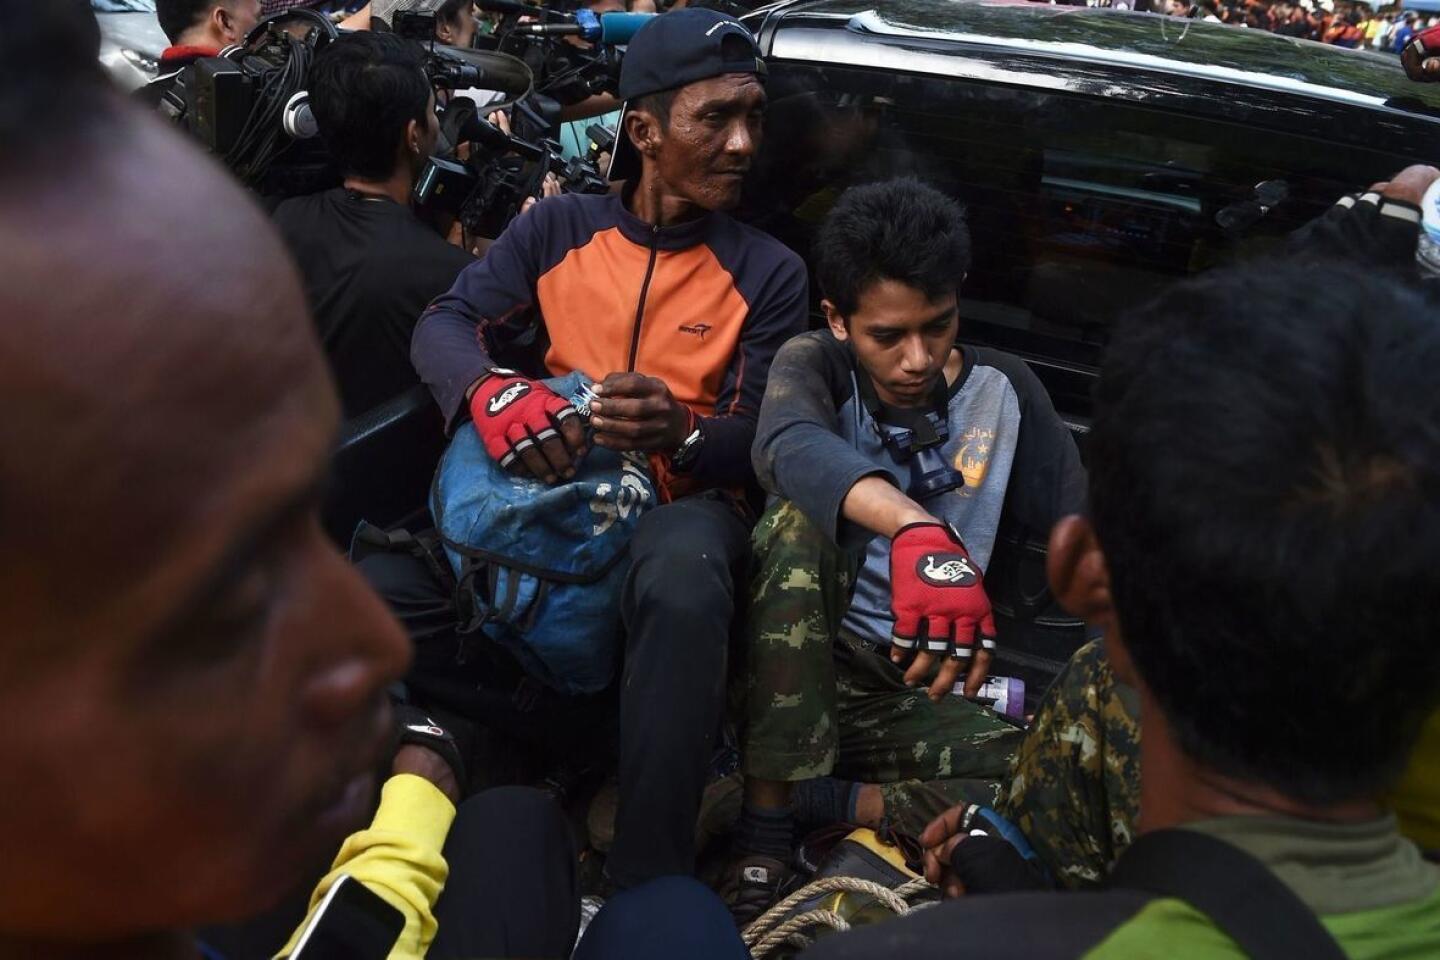 Volunteers prepare Friday to search for alternative entry points to a Thailand cave area as a rescue operation continues for 12 trapped boys and their soccer coach.